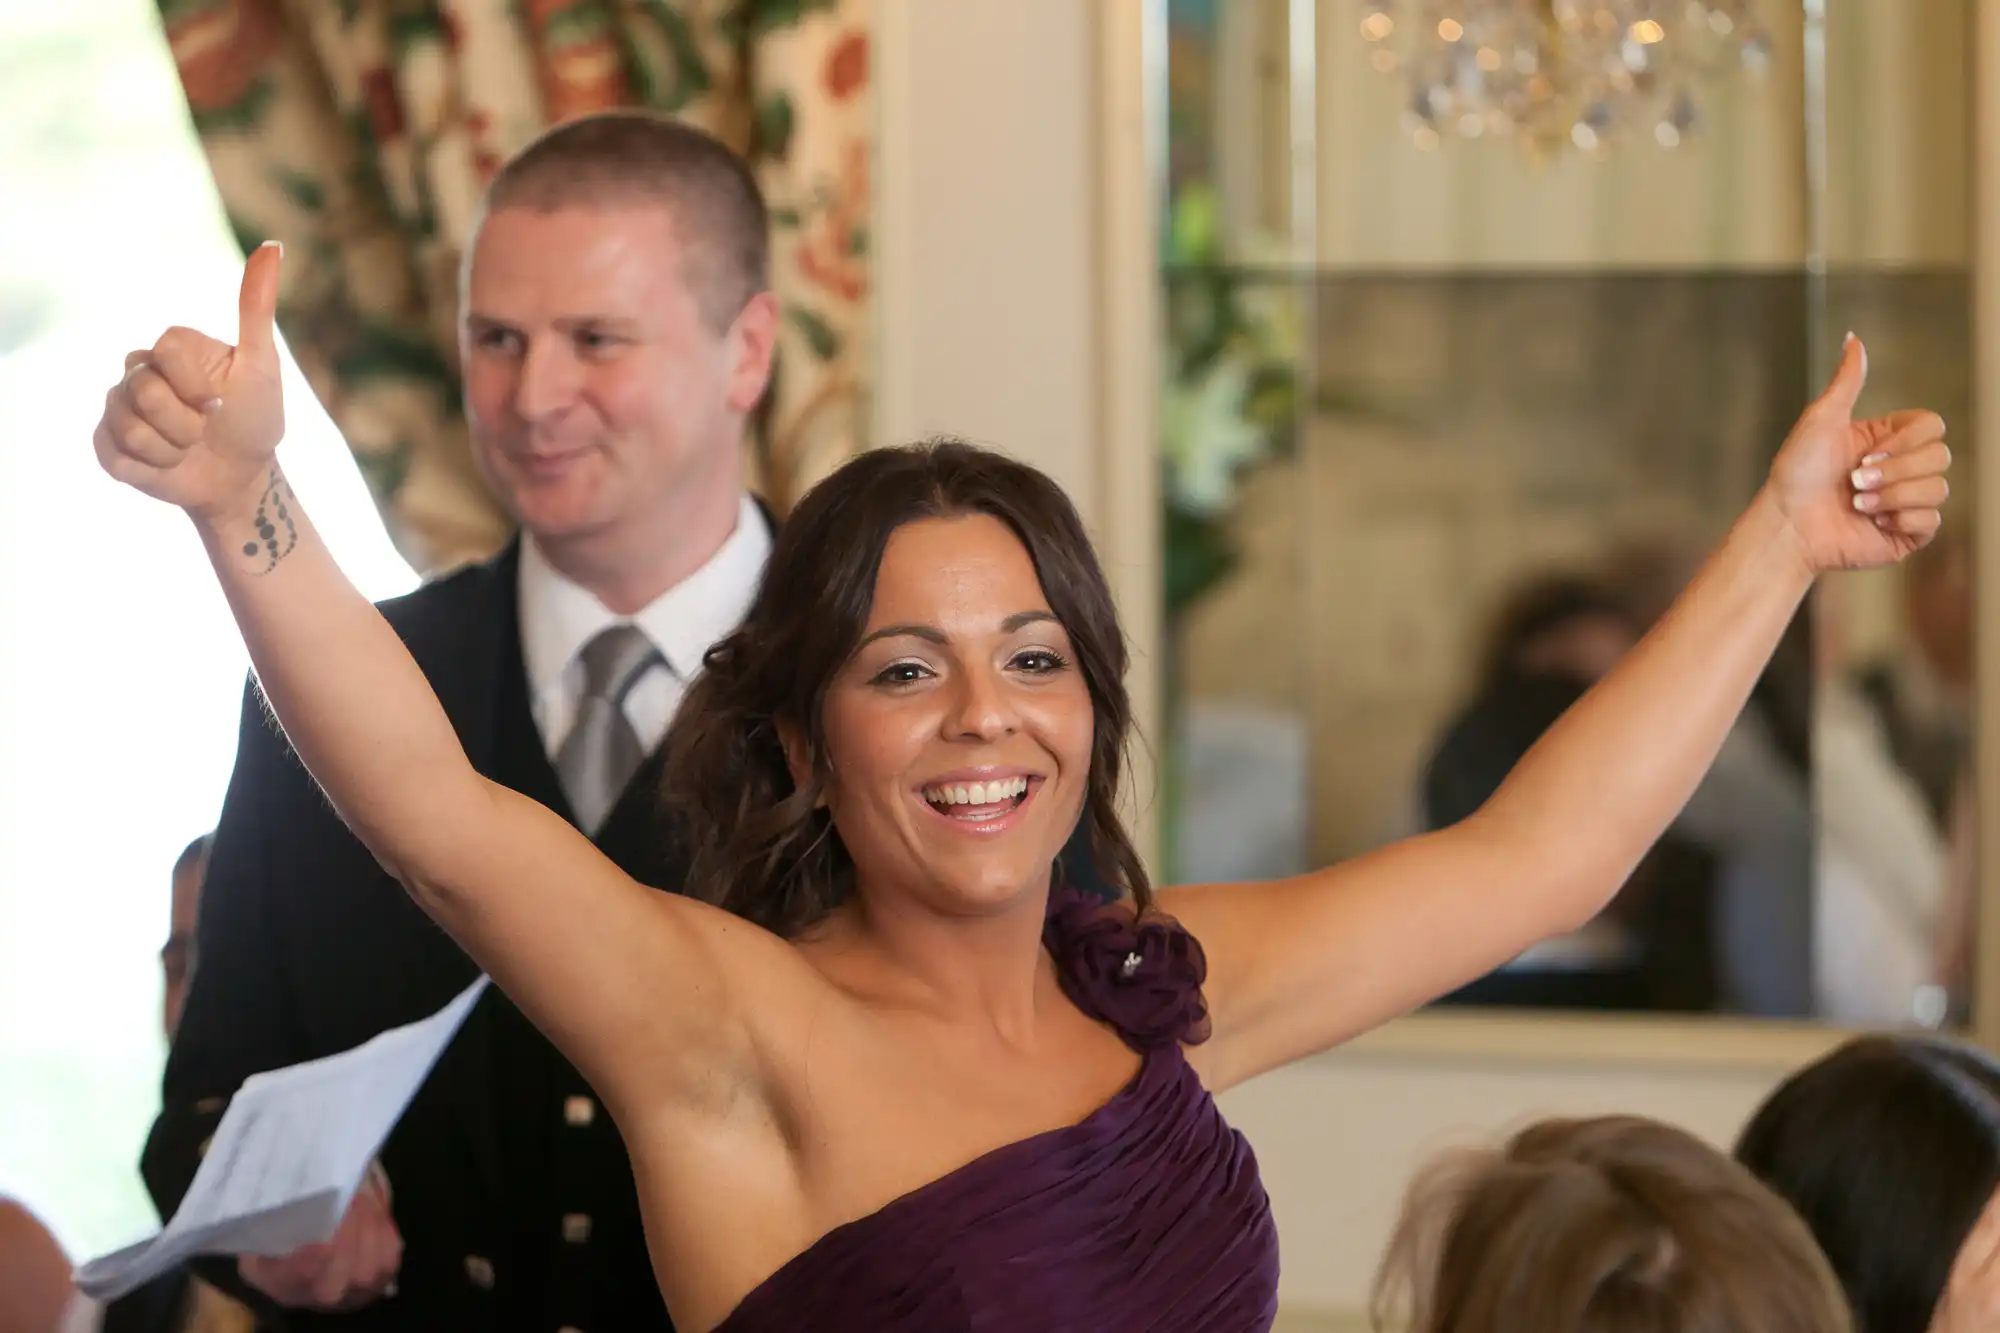 Woman in a purple dress giving thumbs up with a smiling man in the background at a formal event.